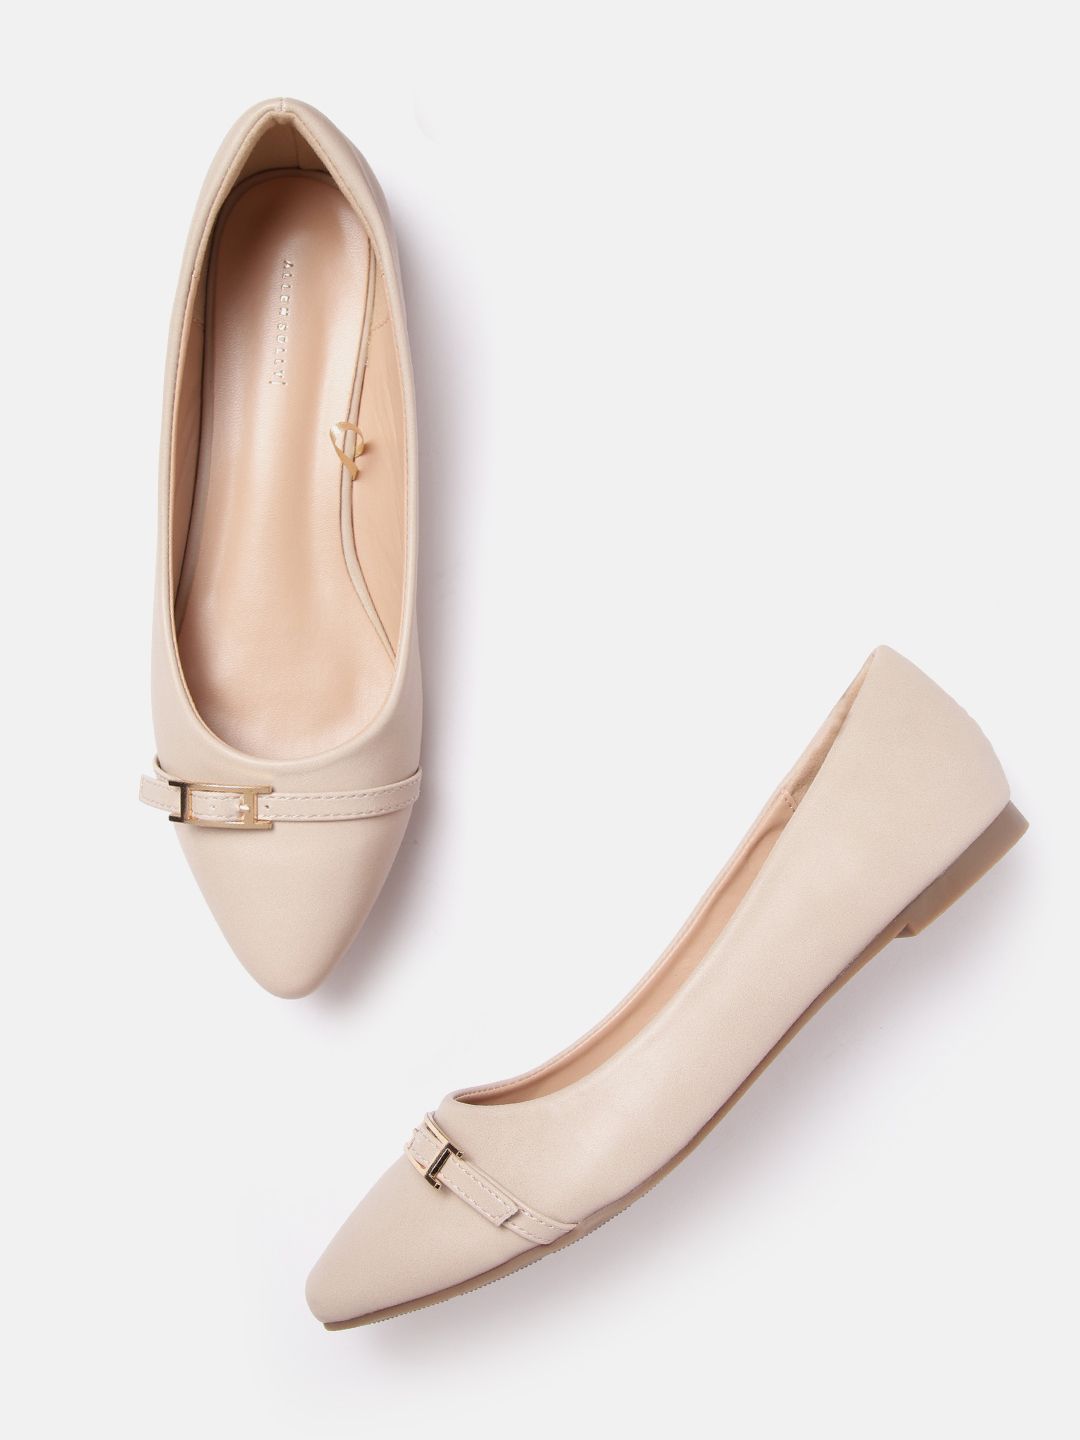 Allen Solly Women Nude-Coloured Ballerinas with Buckle Detail Price in India